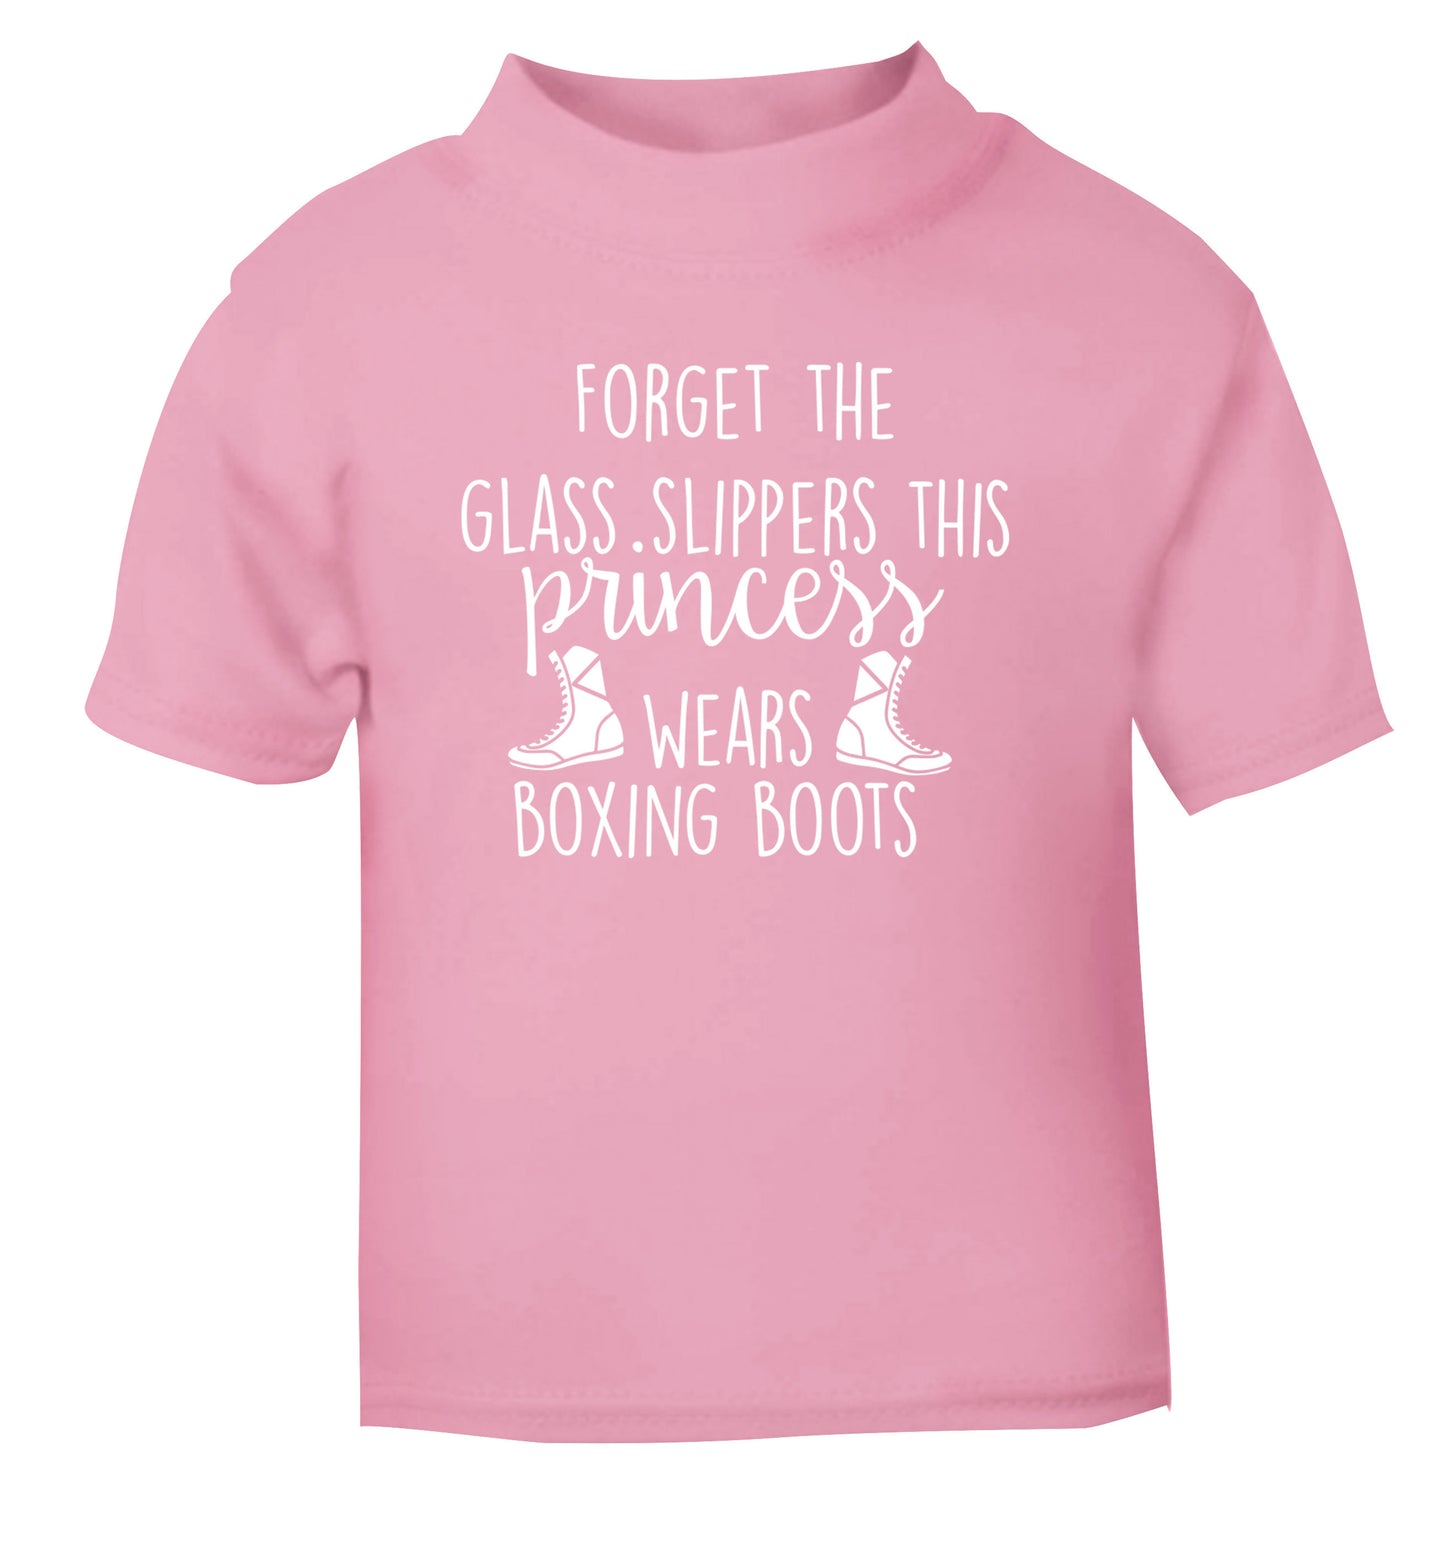 Forget the glass slippers this princess wears boxing boots light pink Baby Toddler Tshirt 2 Years